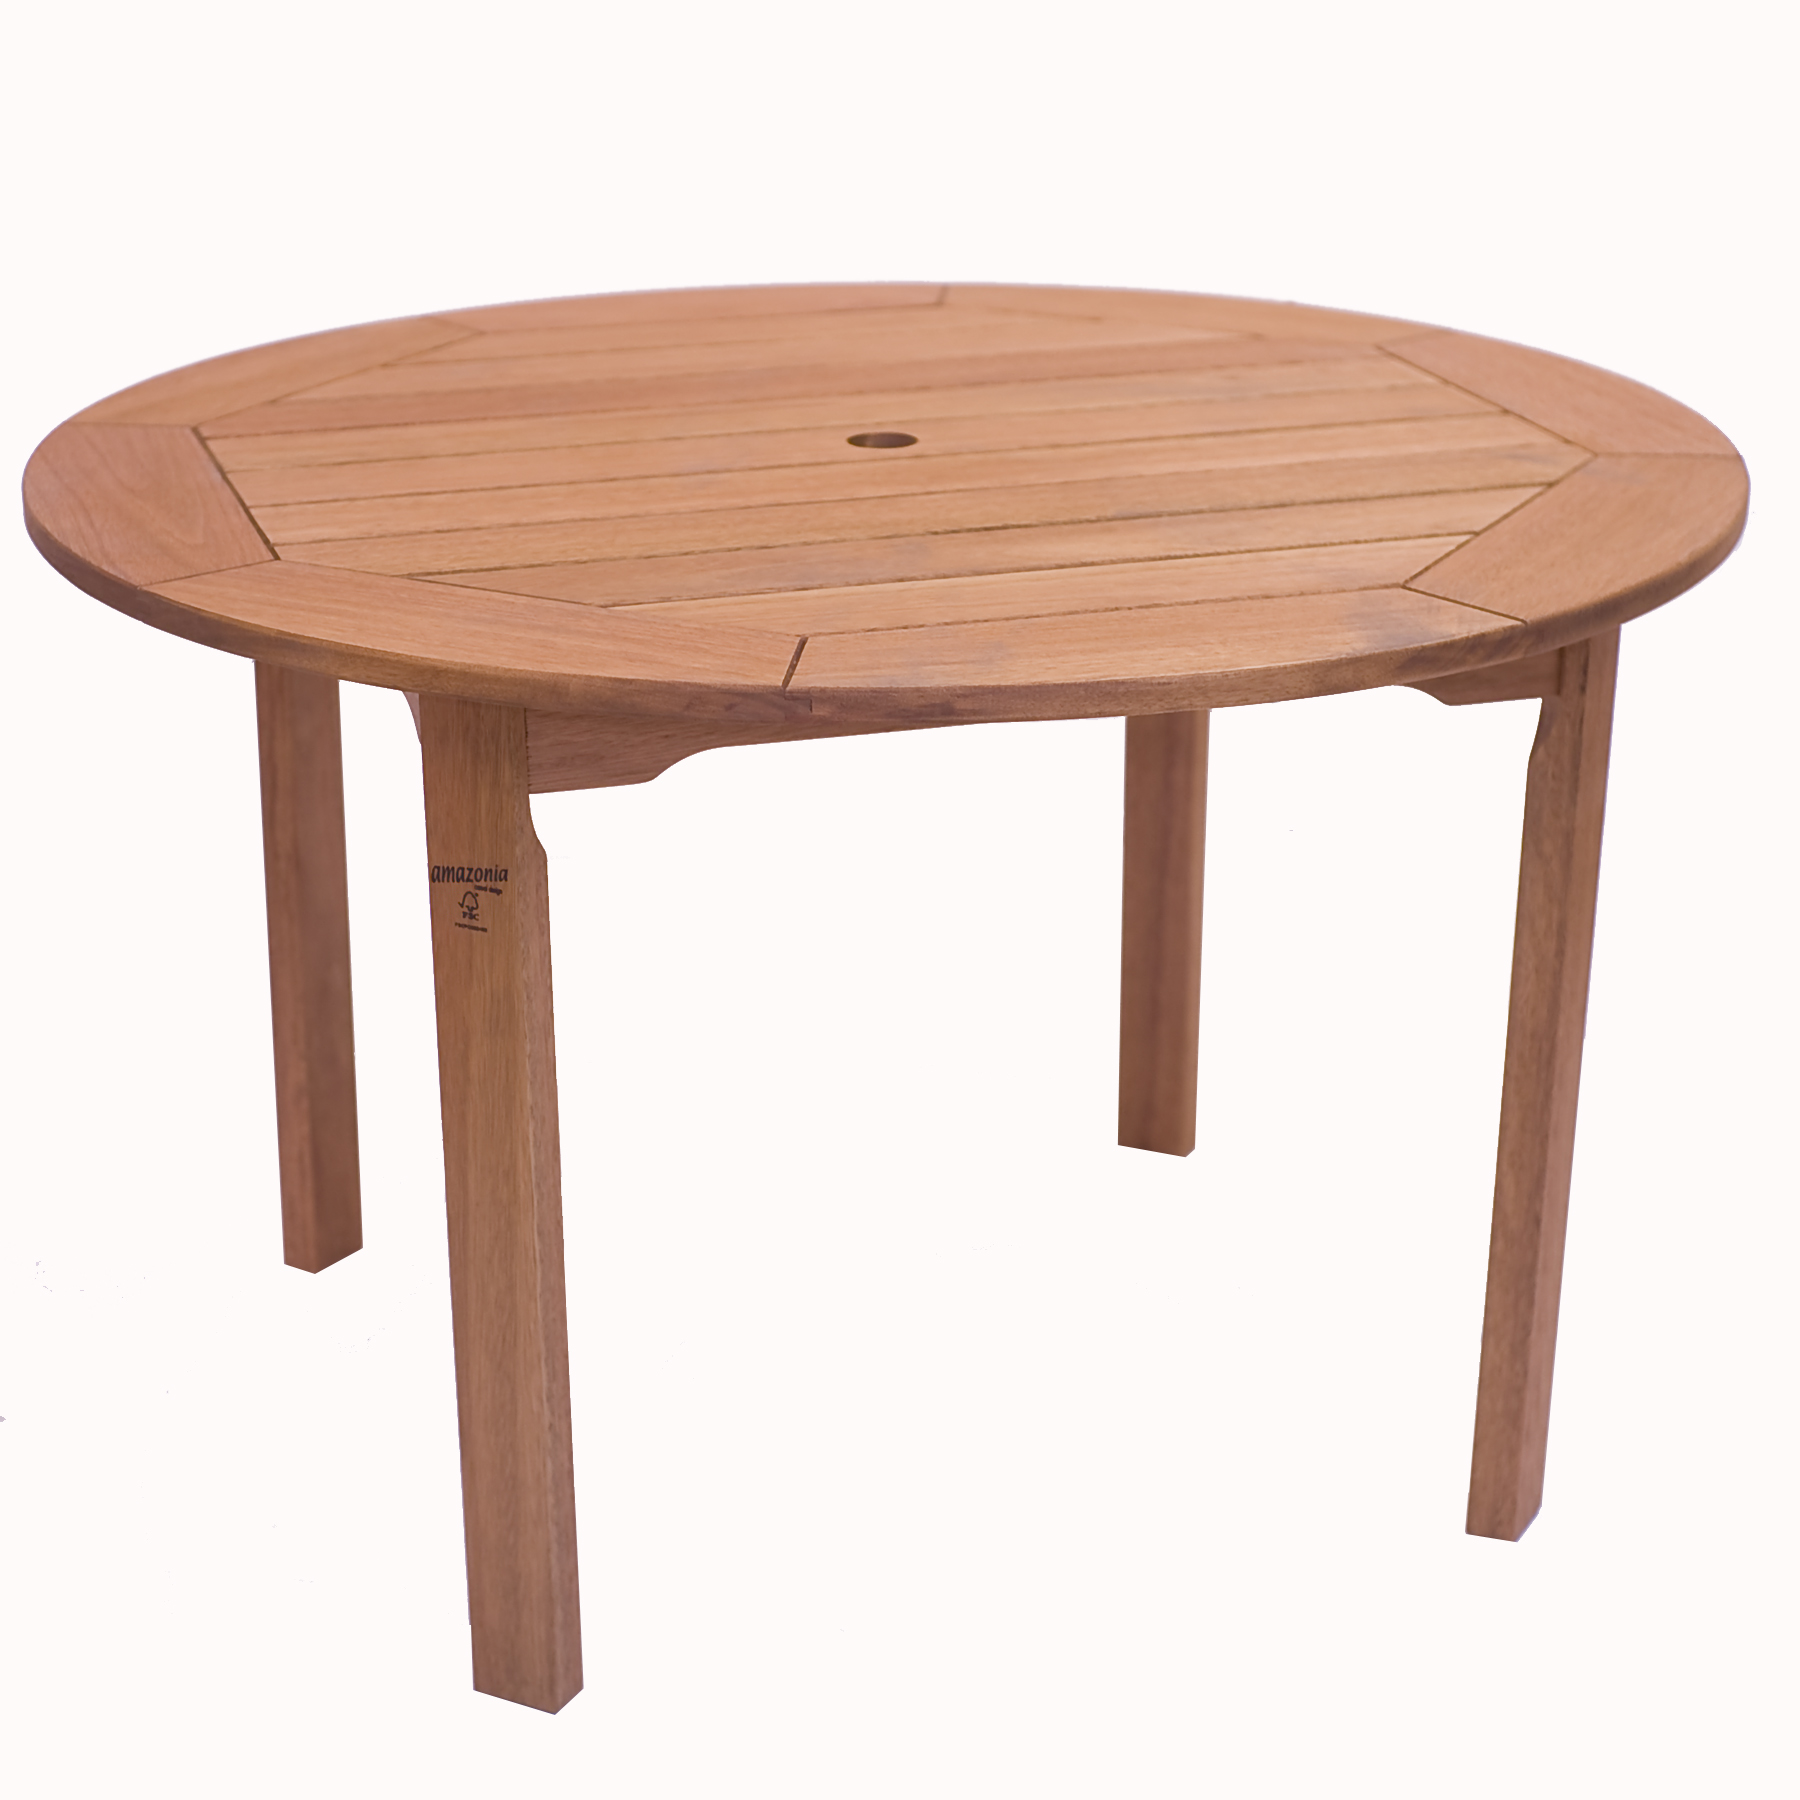 New York 5-Piece Round Patio Dining Set | Eucalyptus Wood | Ideal for Outdoors and Indoors - image 3 of 7